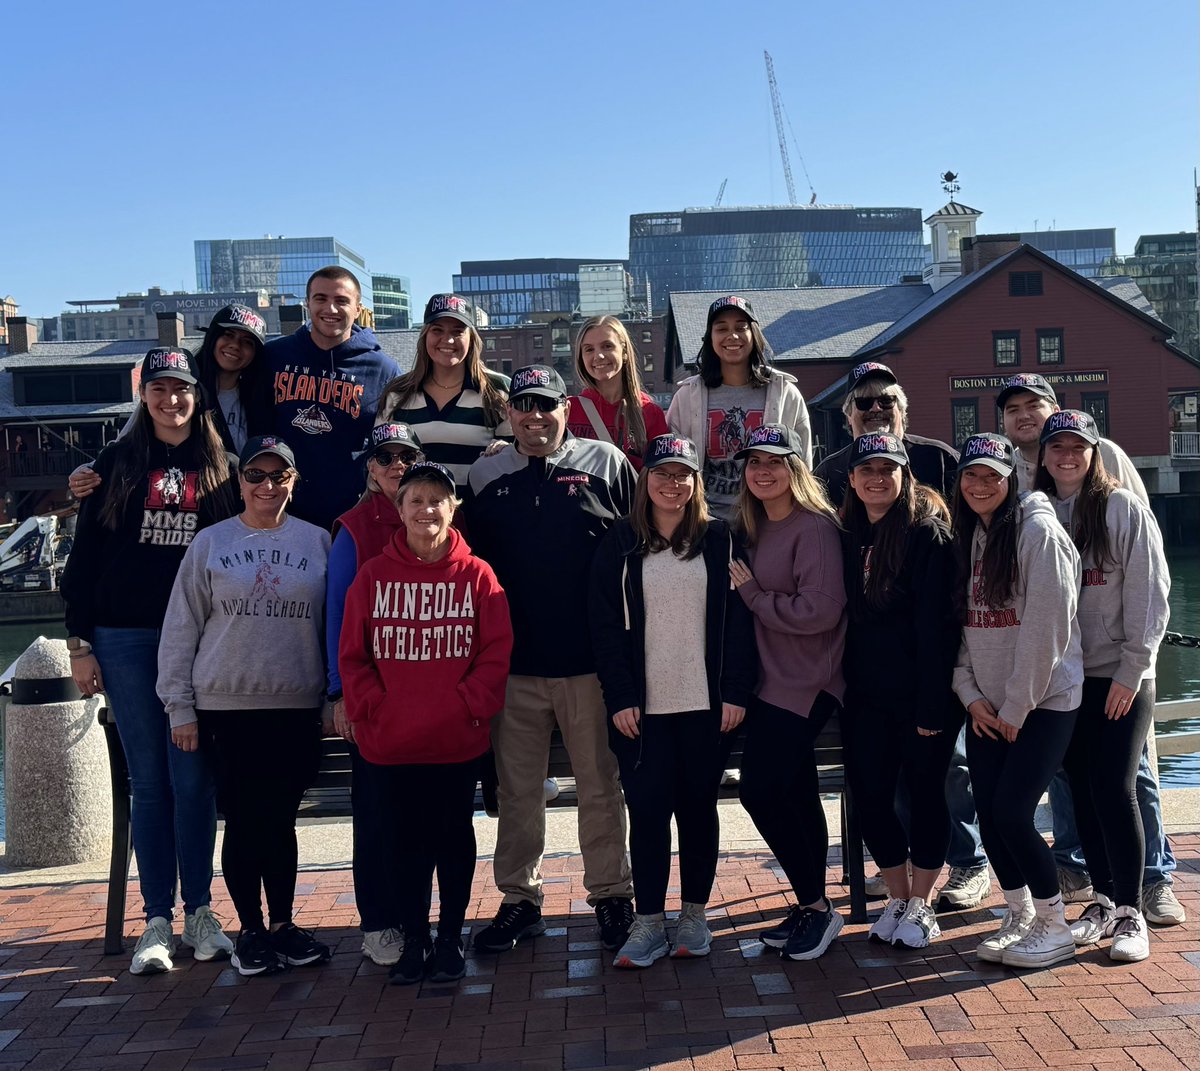 167 learners, 18 chaperones, 36+ hours & countless memories for @MineolaMS on our overnight trip to Boston! #MineolaProud